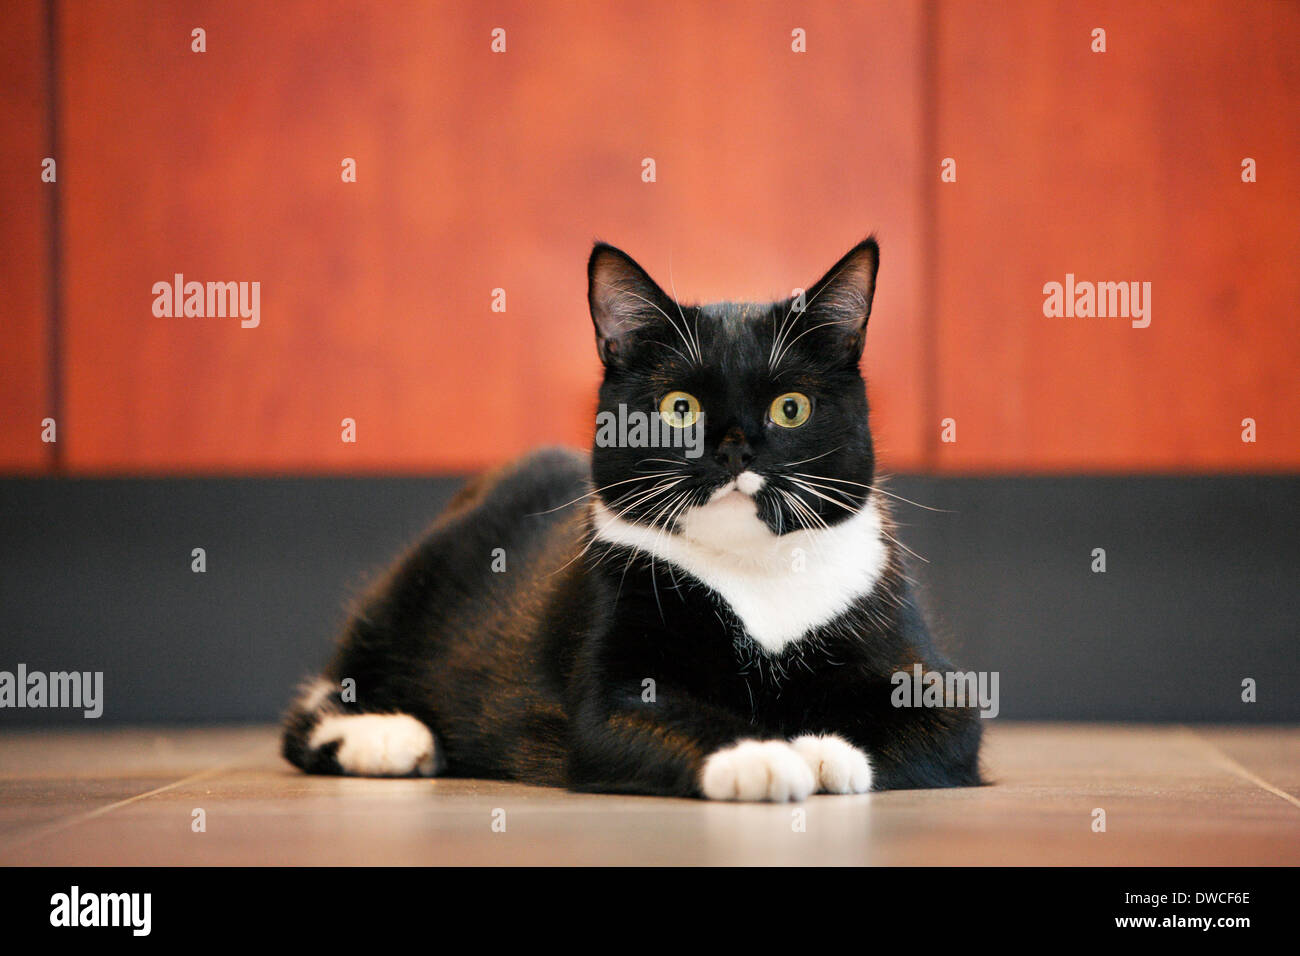 Close up of tuxedo cat, bicolor domestic cat with a white and black coat resting on the floor in house Stock Photo